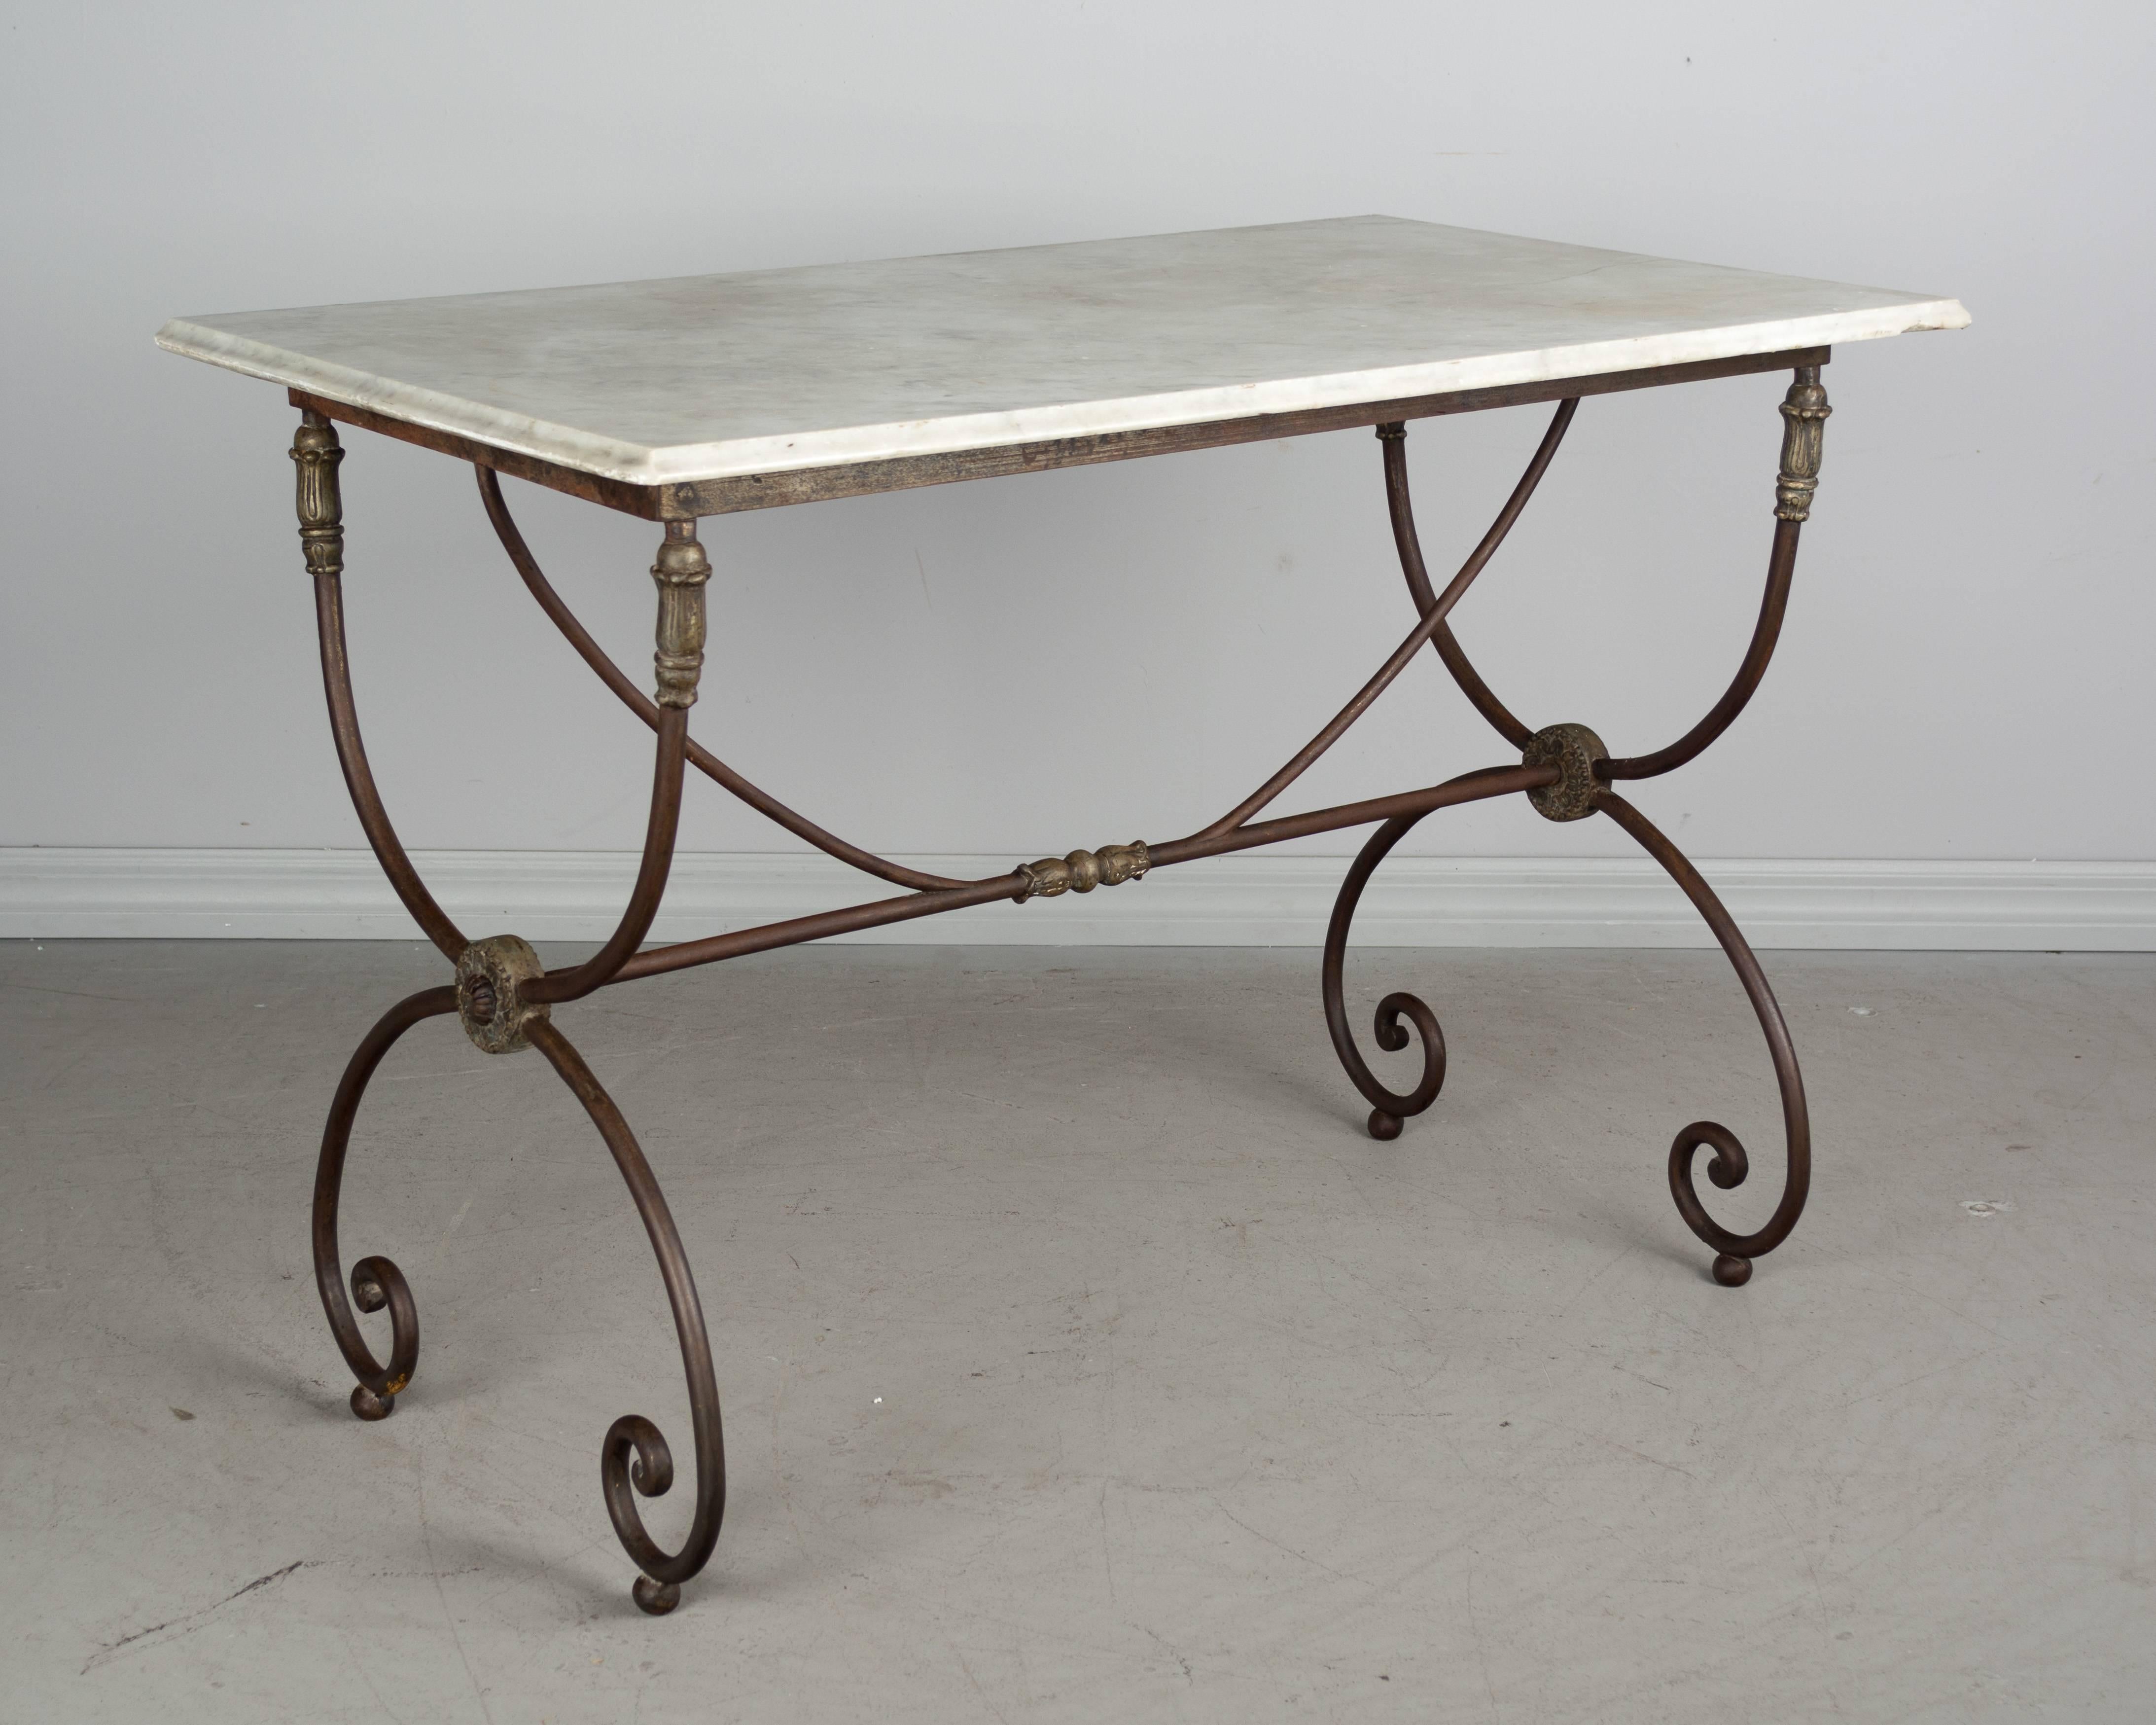 French bistro or pastry table with wrought iron base and original white marble top. Nice warm bronze patina to base with decorative medallions. Hairline in marble, but no structural damage. Marble is edged on three sides.